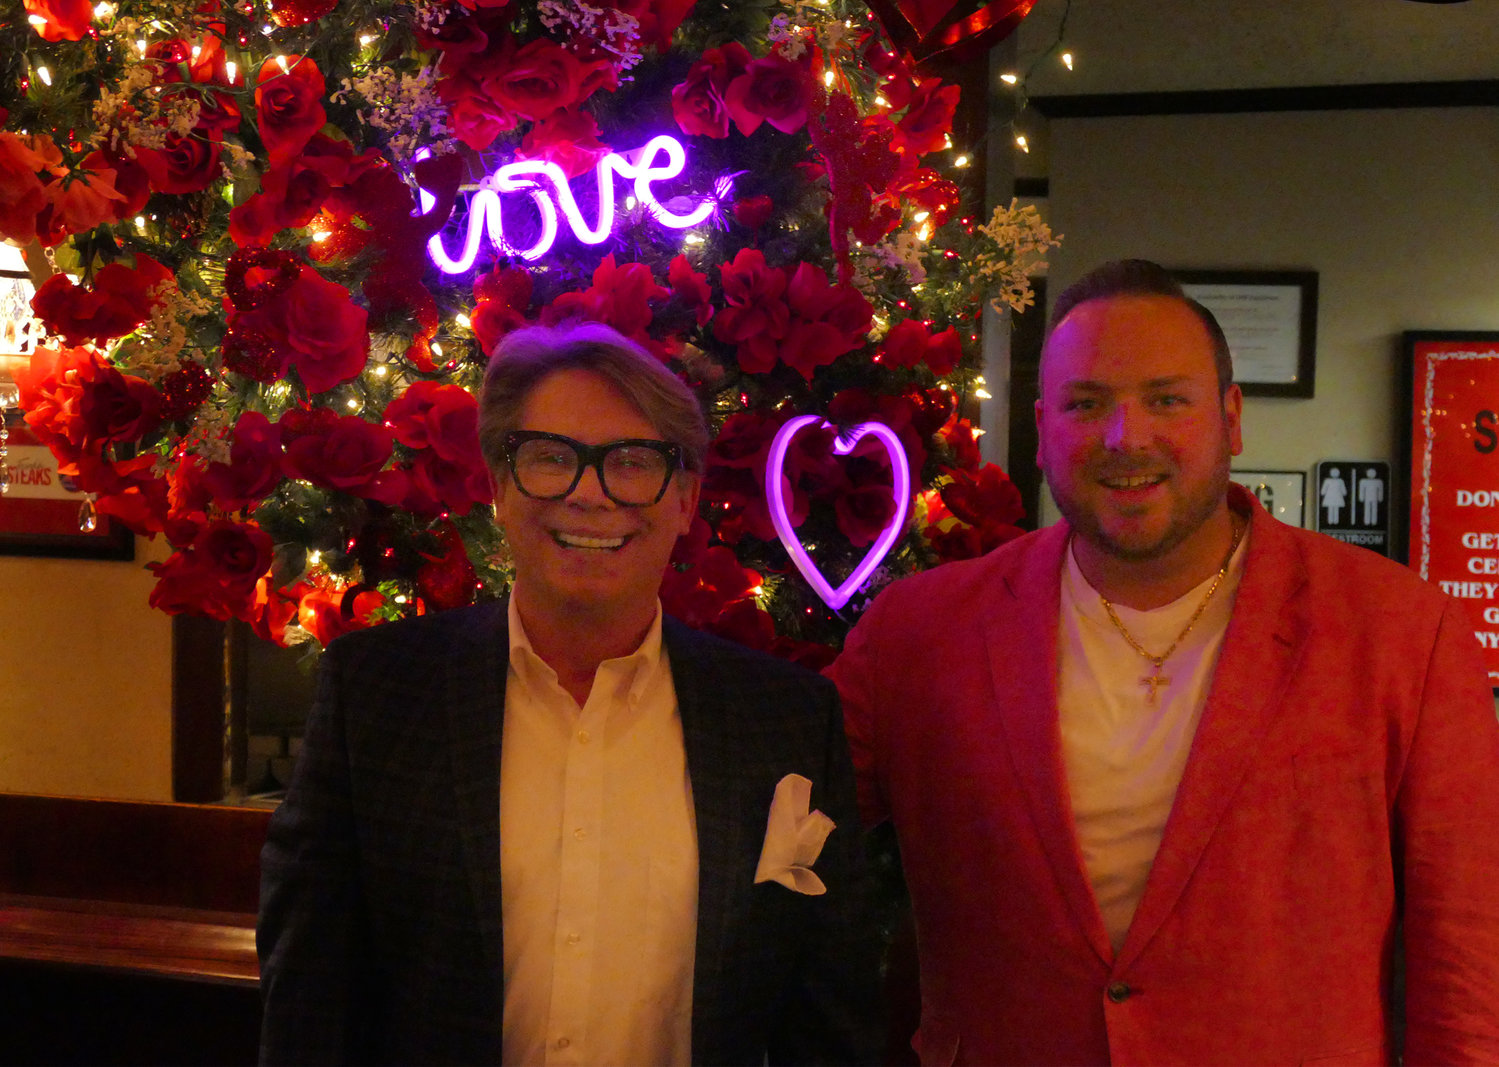 Interior designer Michael Delahanty (left) and Frank's Steaks owner Chris Meyer in front of the "lovers' lane" portion of the Valentine's Day design installations.